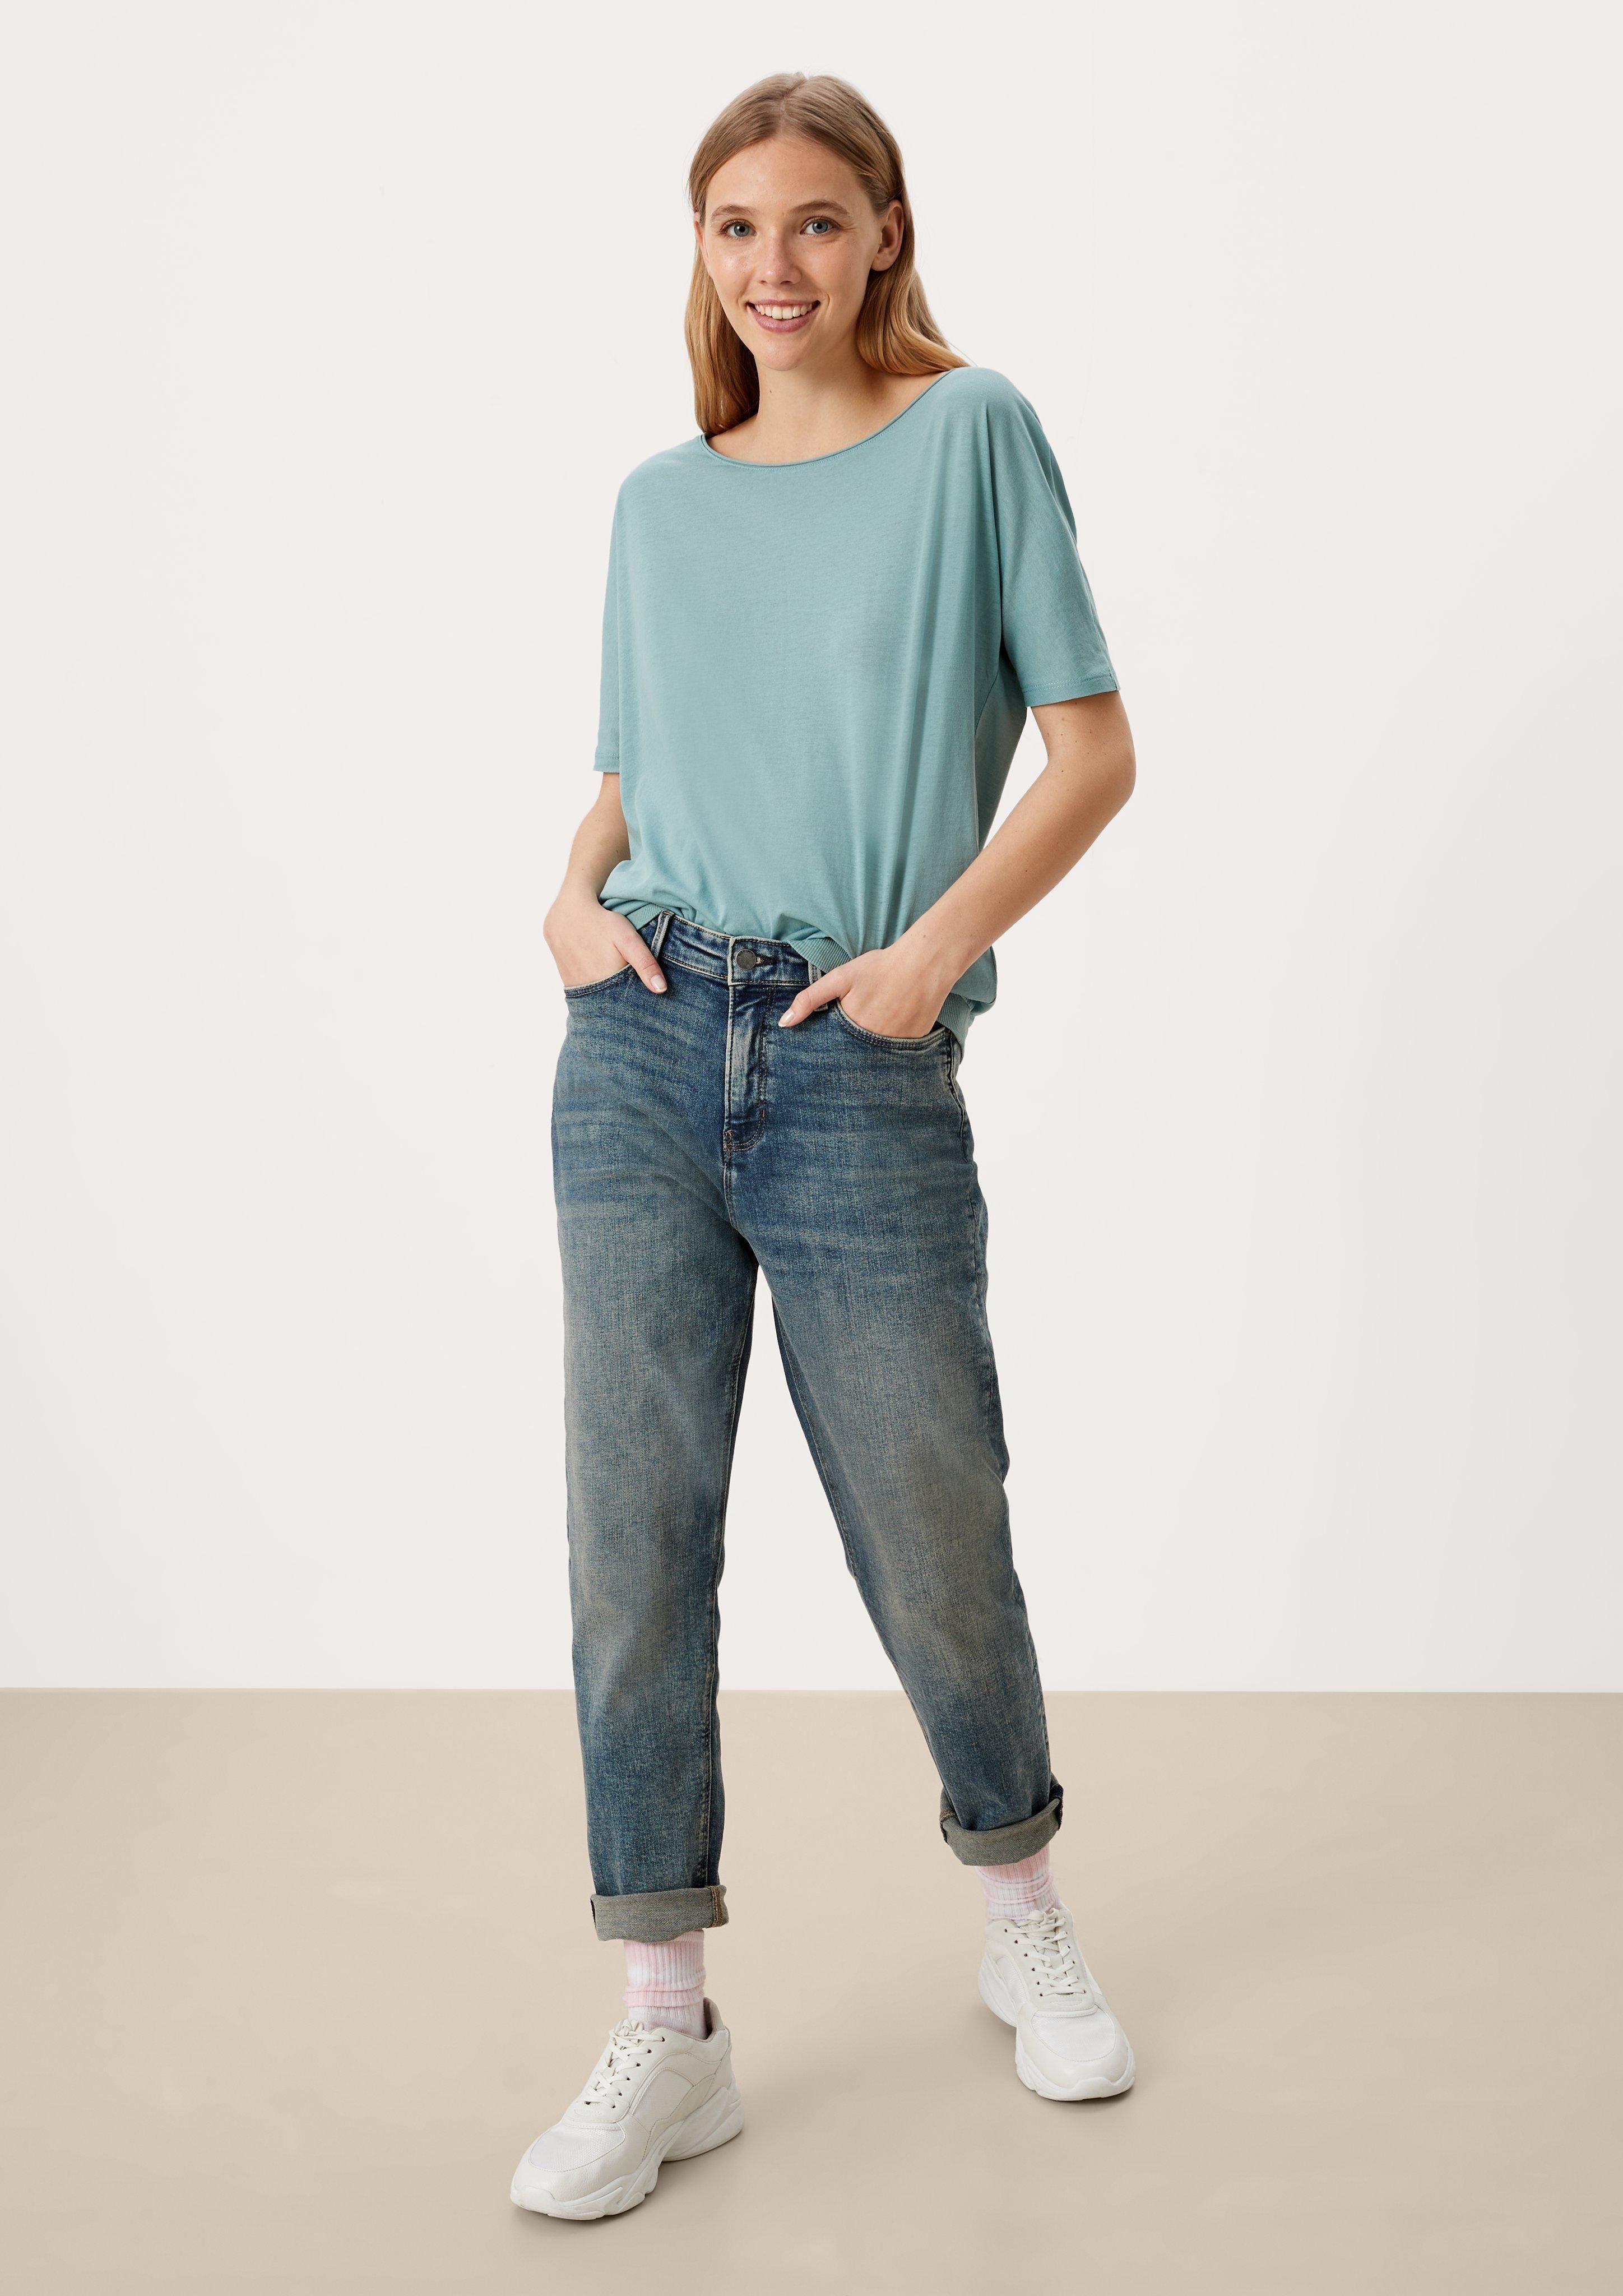 Fit: Mom-Jeans Regular Leder-Patch QS Waschung, mit Stoffhose Waschung